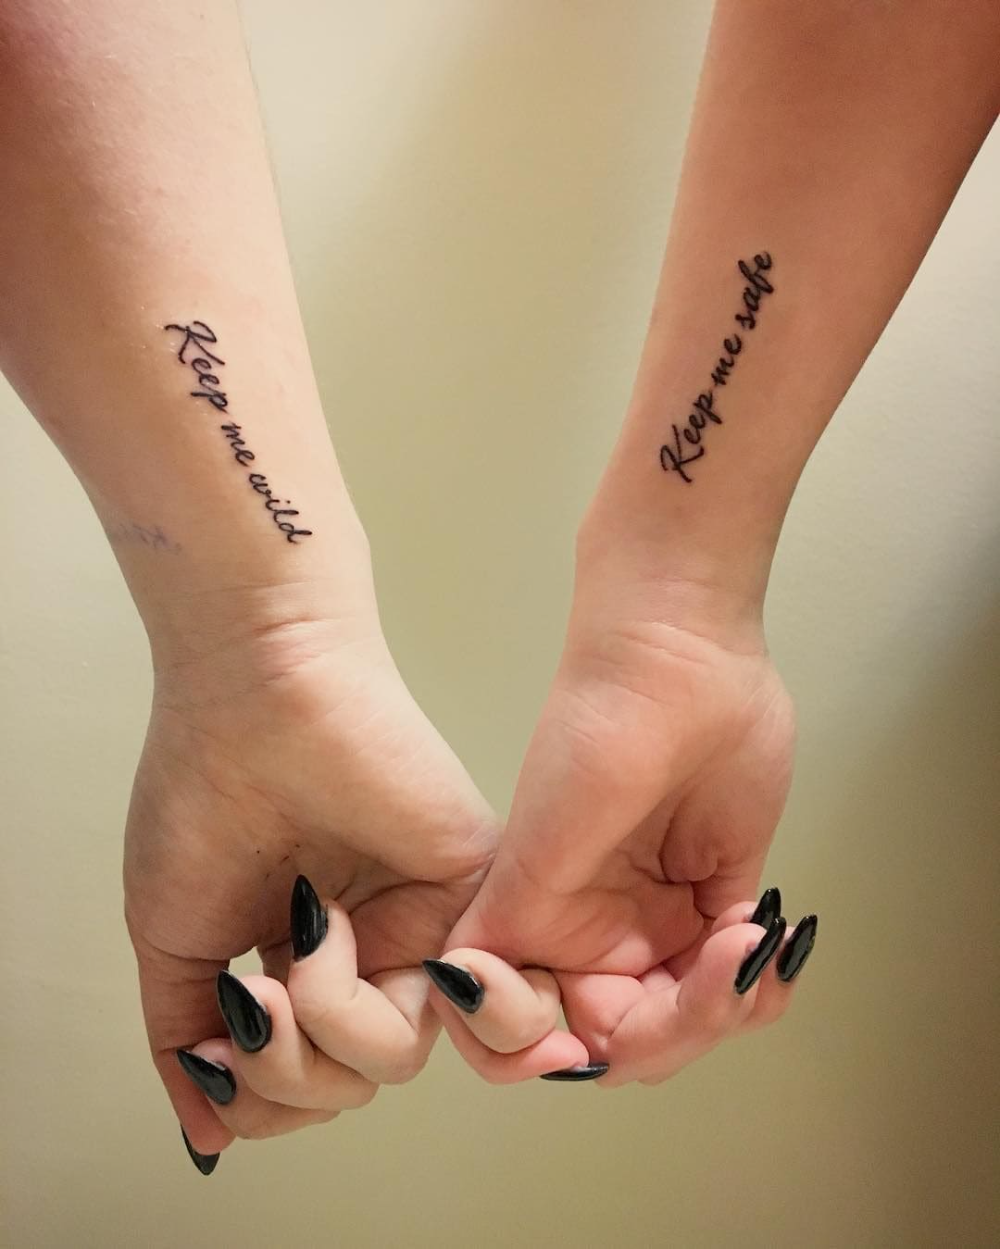 155 Best Friend Tattoos to Cherish Your Friendship (with Meanings) - Wild Tattoo Art | Small friendship tattoos, Friendship tattoos, Small best friend tattoos